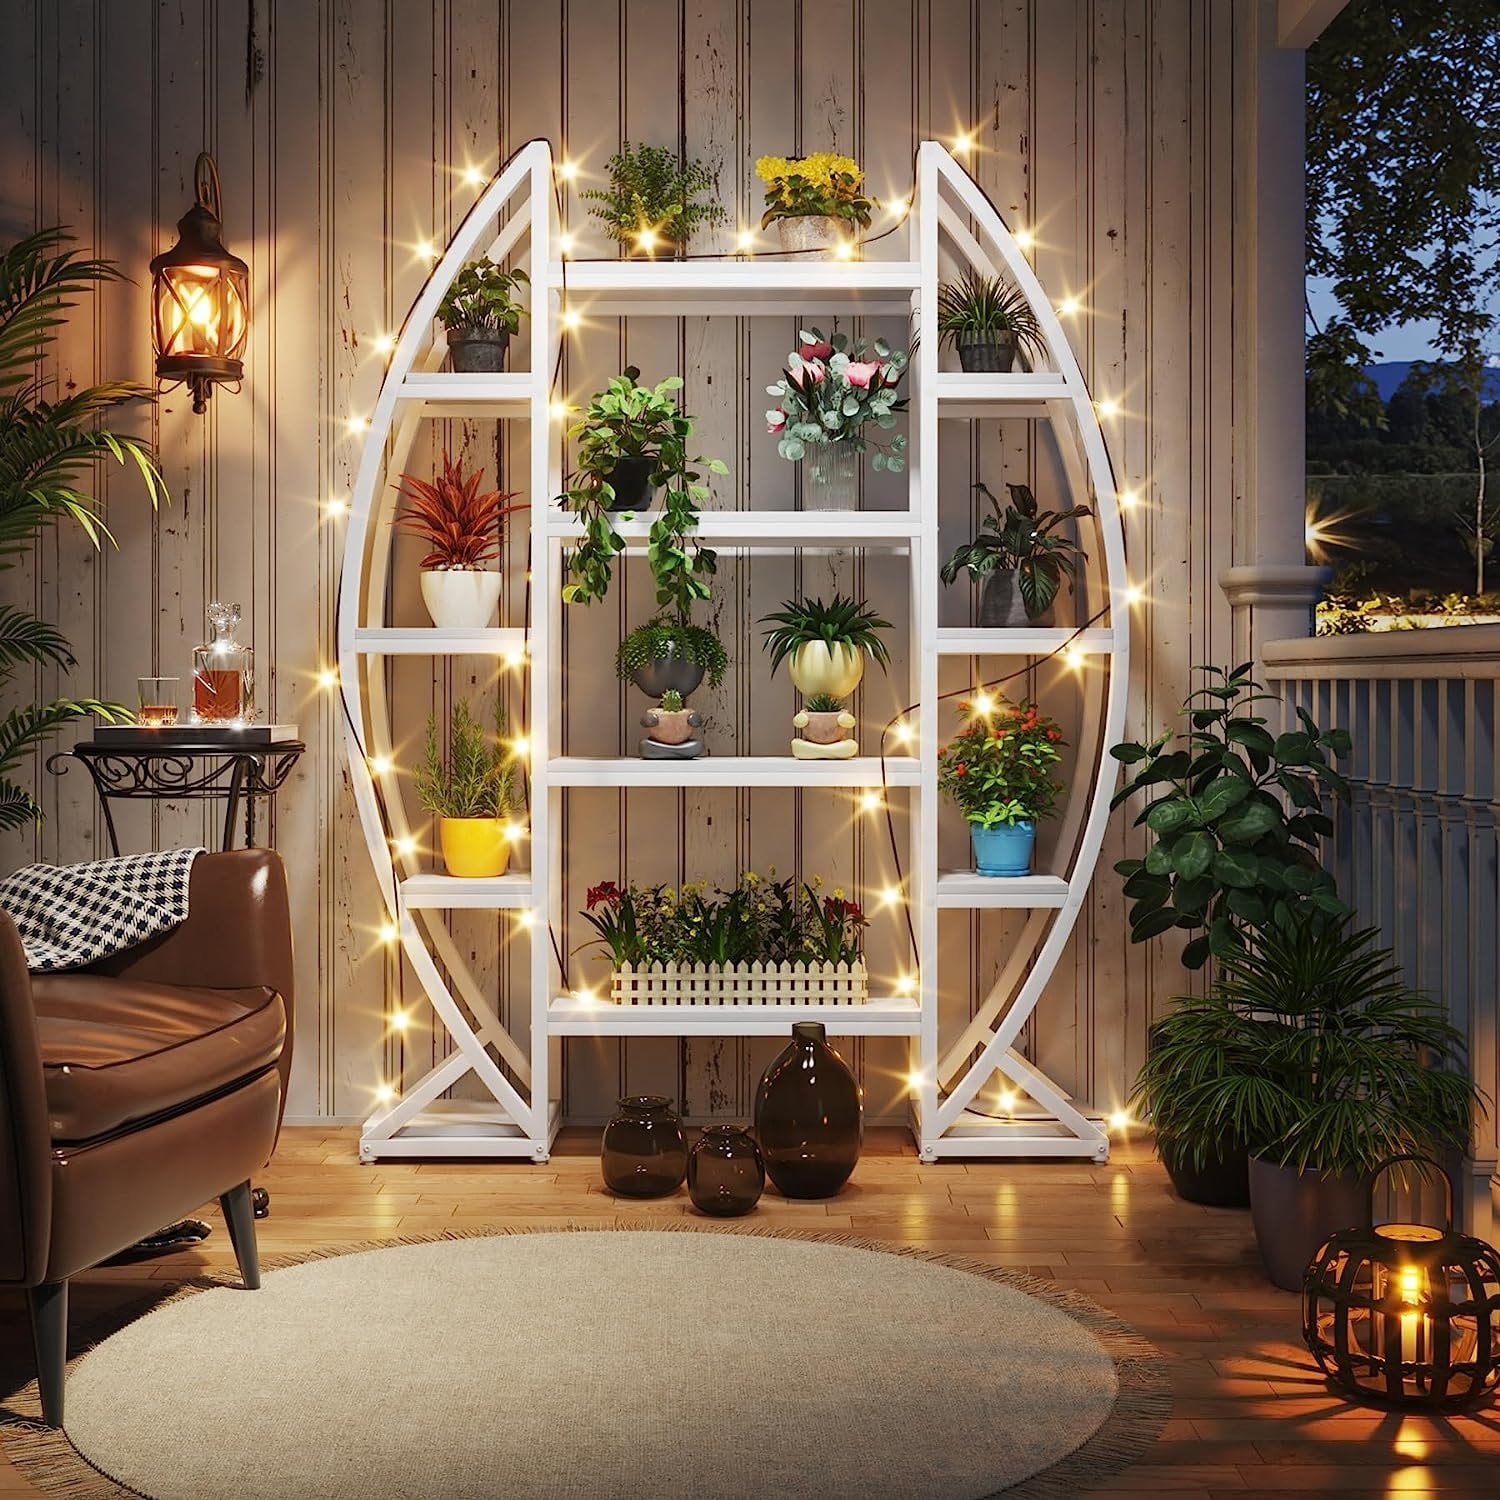 https://ak1.ostkcdn.com/images/products/is/images/direct/90aa4fe4b2e49a65010fed9a23723577f38b6639/Creative-Half-Moon-Shaped-Plant-Stand-Indoor.jpg